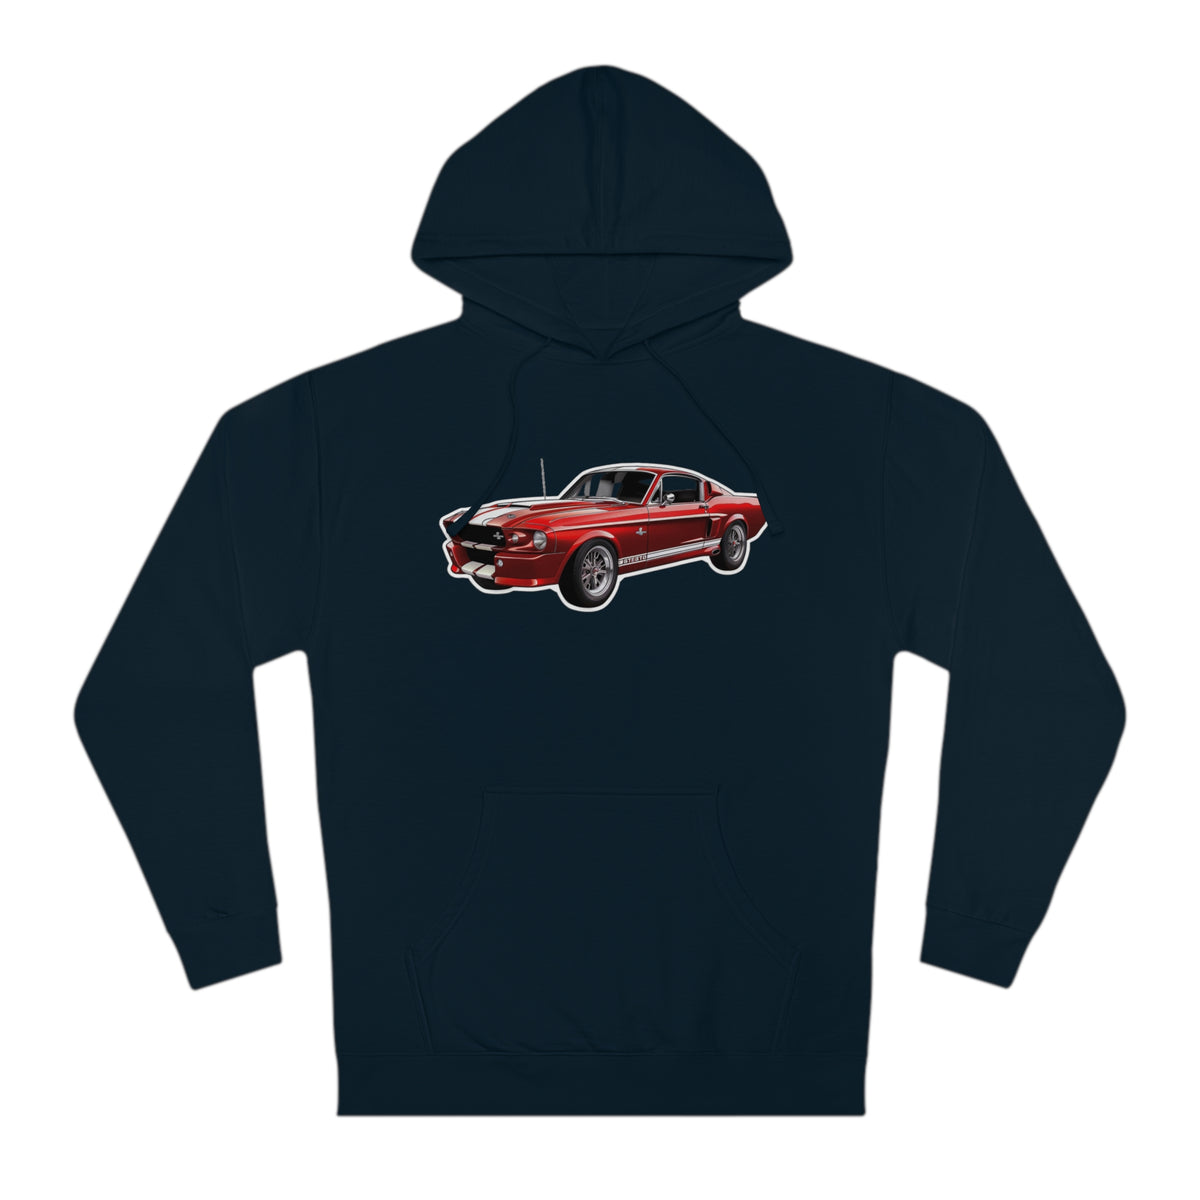 Classic Crimson Shelby GT350 Hoodie - Timeless Muscle Hooded Sweatshirt